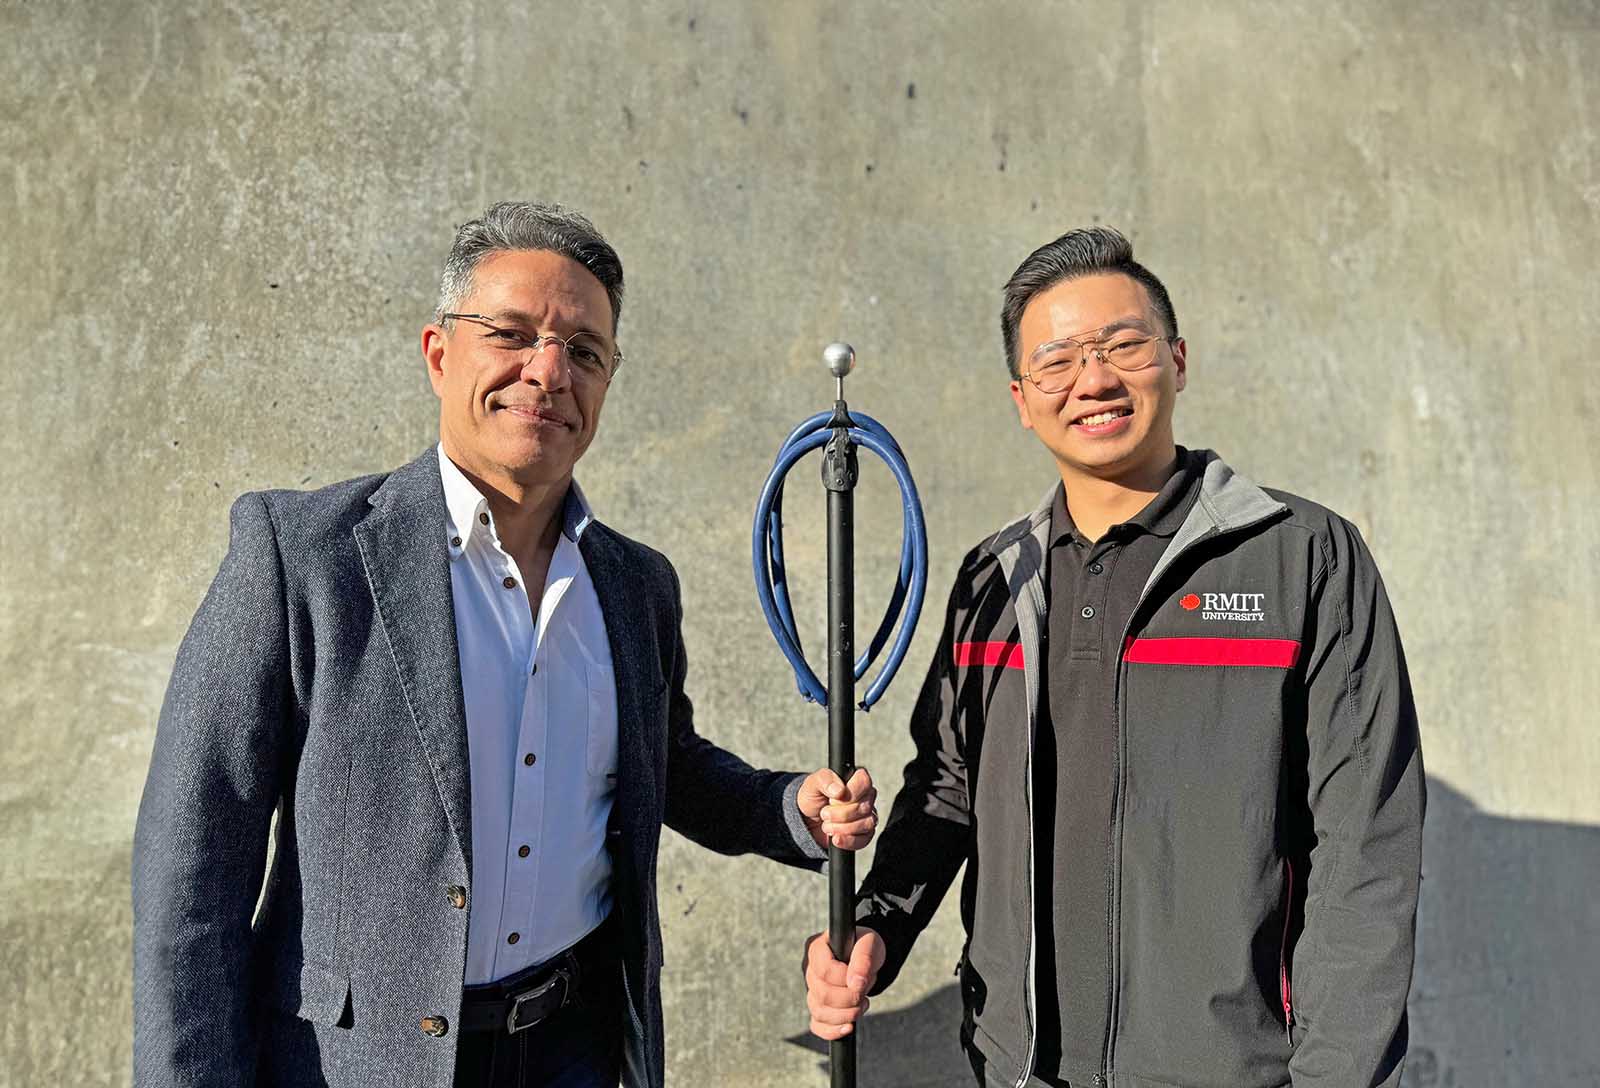 Professor Majid Nazem and Junlin Rong with the device. Credit: Michael Quin, RMIT.